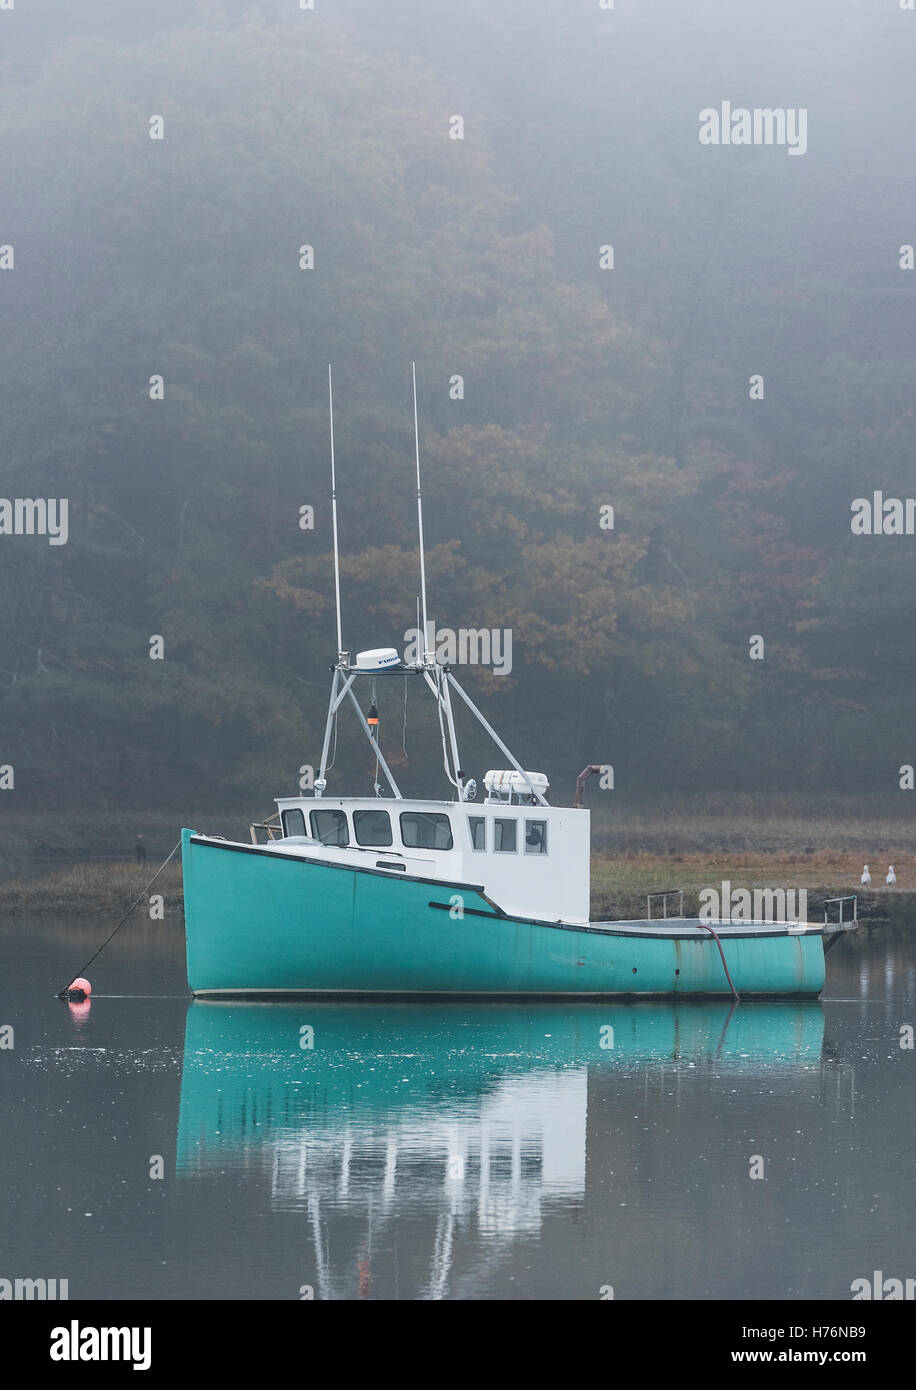 Fishing boat in morning mist, Kennebunk, Maine, USA. Stock Photo